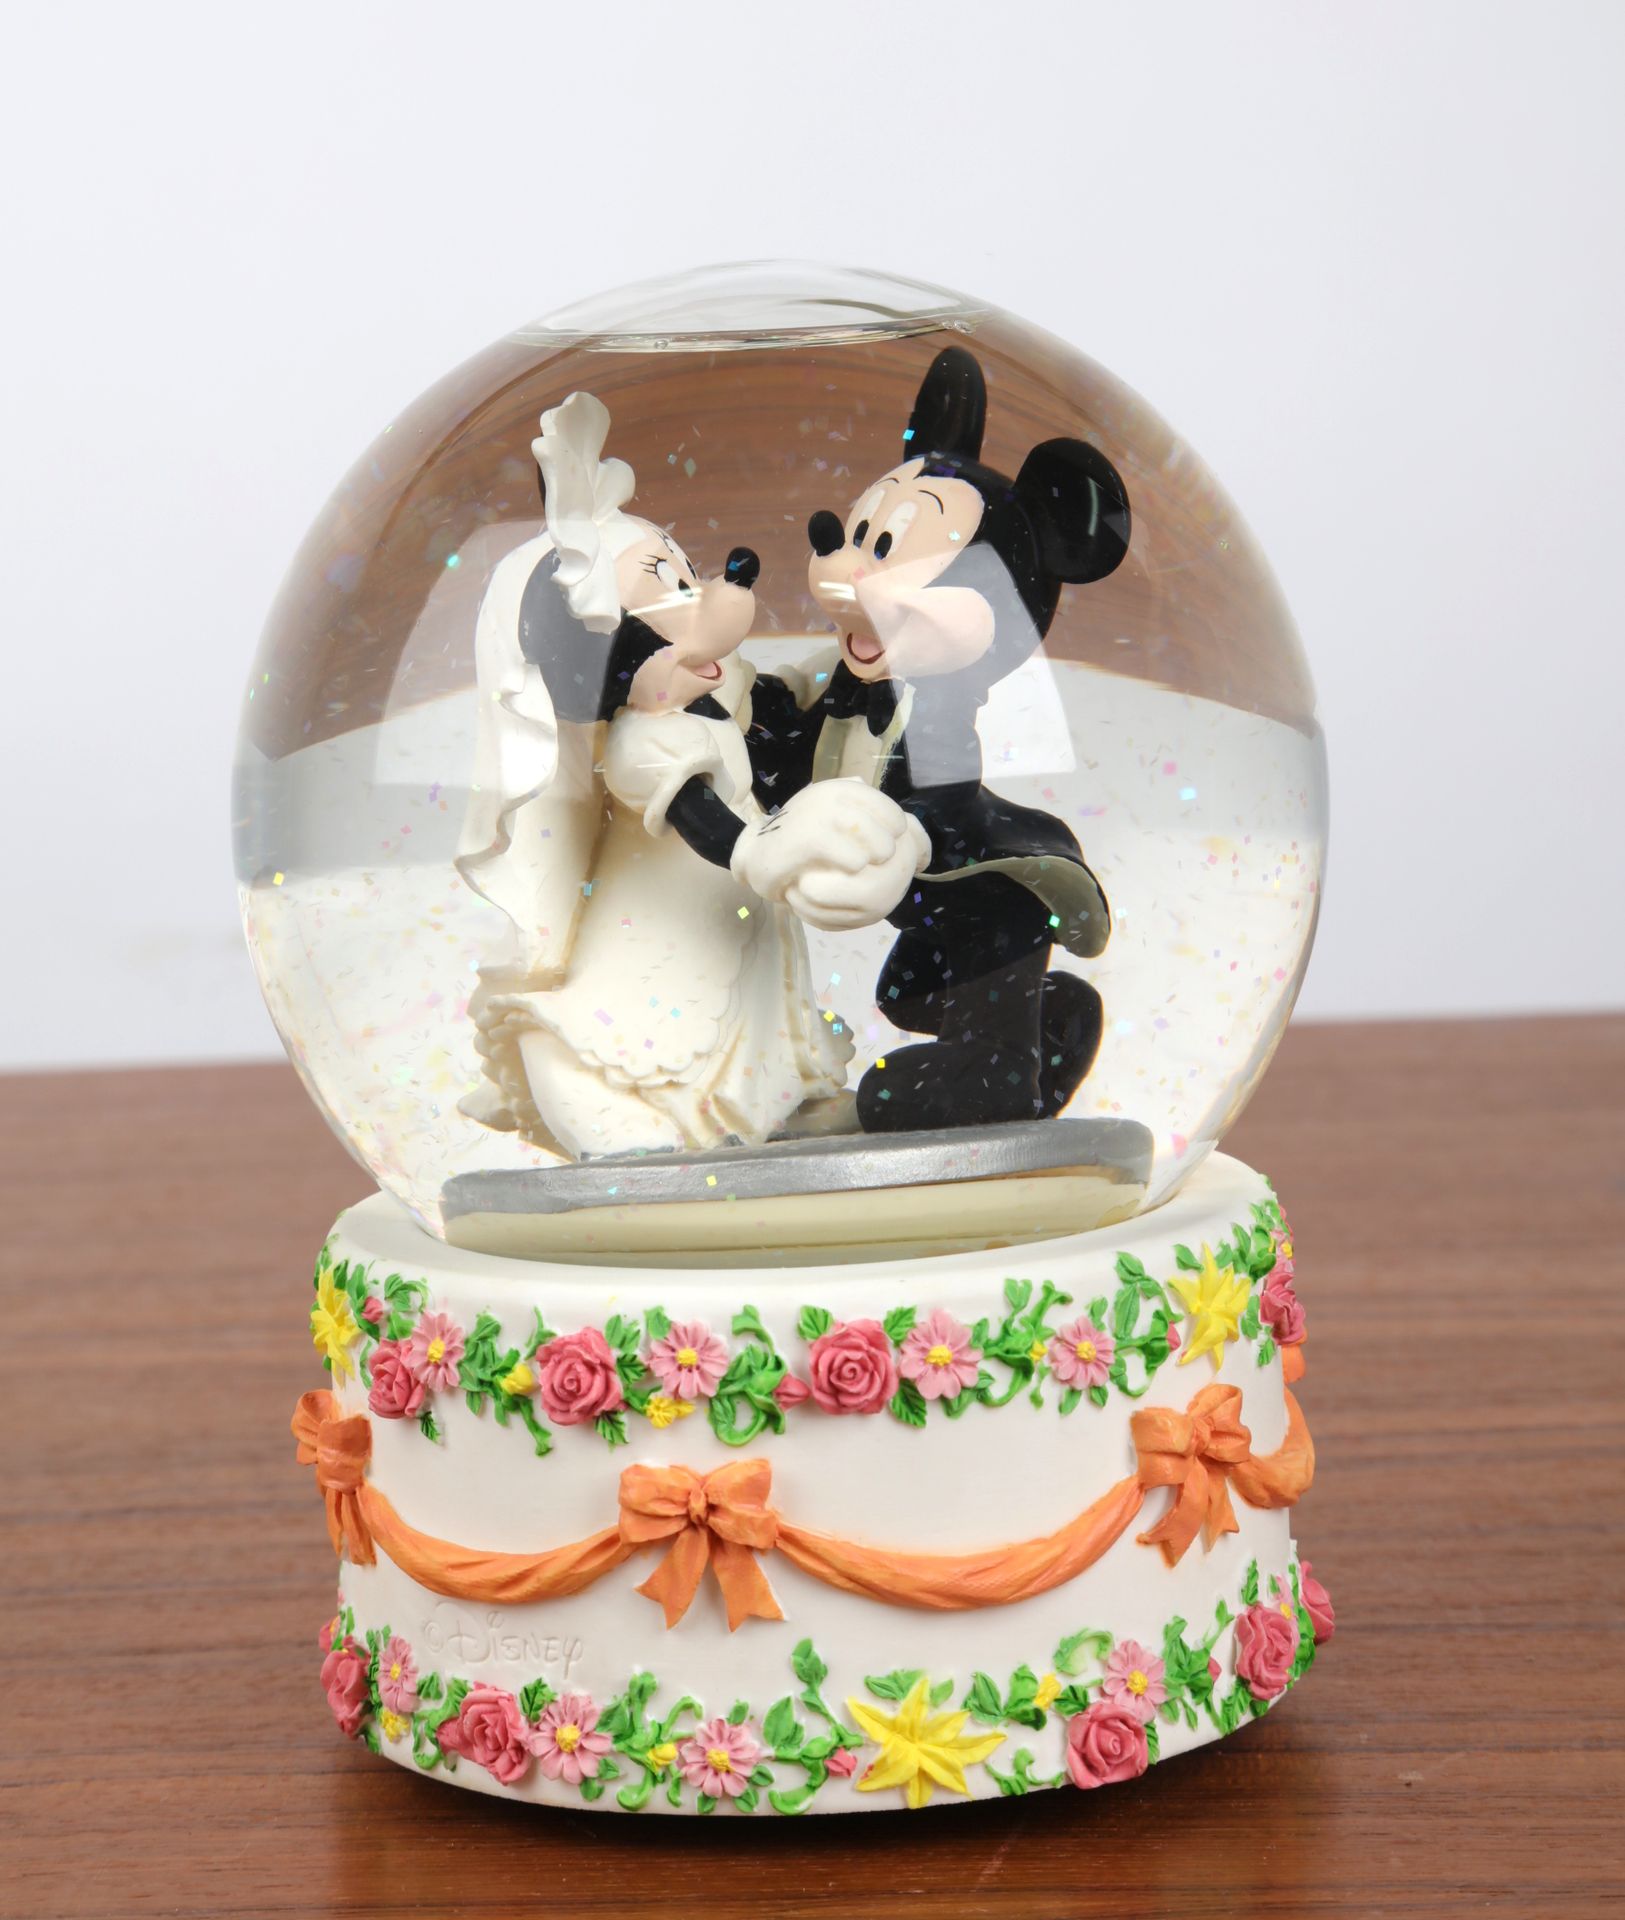 Null "Christmas bauble", and music box with "Mickey and Minnie" decoration. 16x1&hellip;